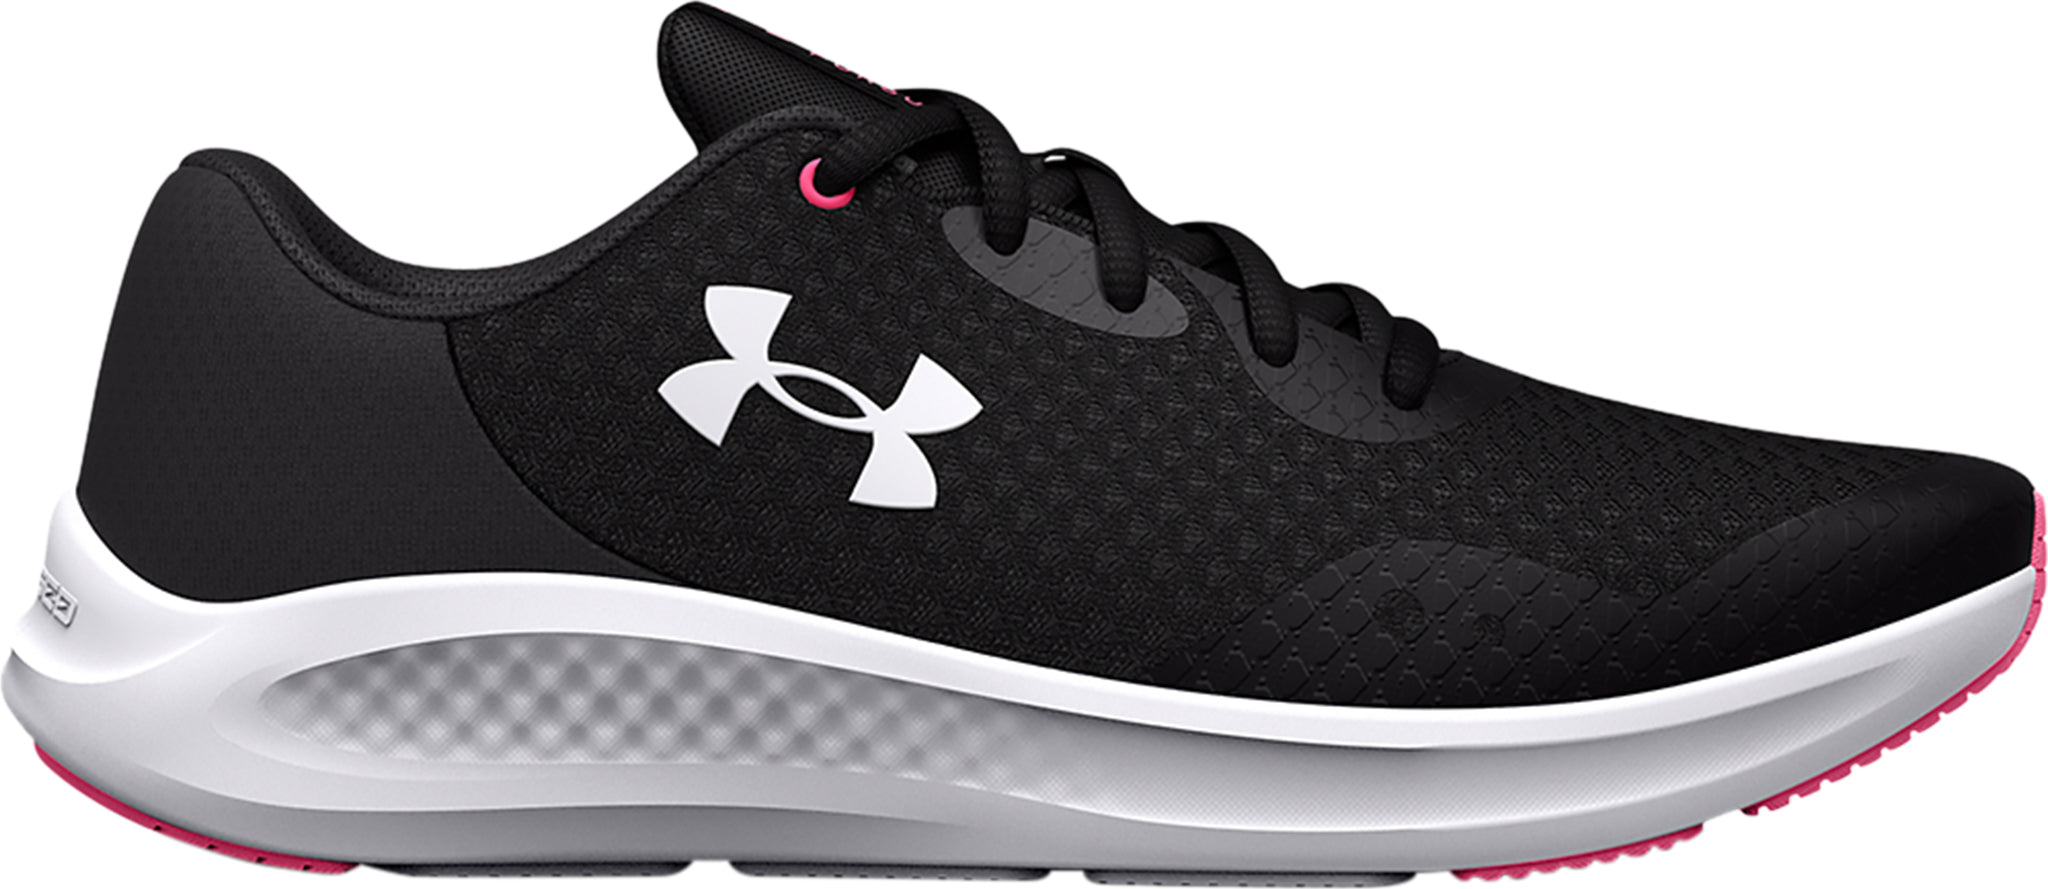 Under Armour Charged Pursuit 3 Running Shoes - Girls